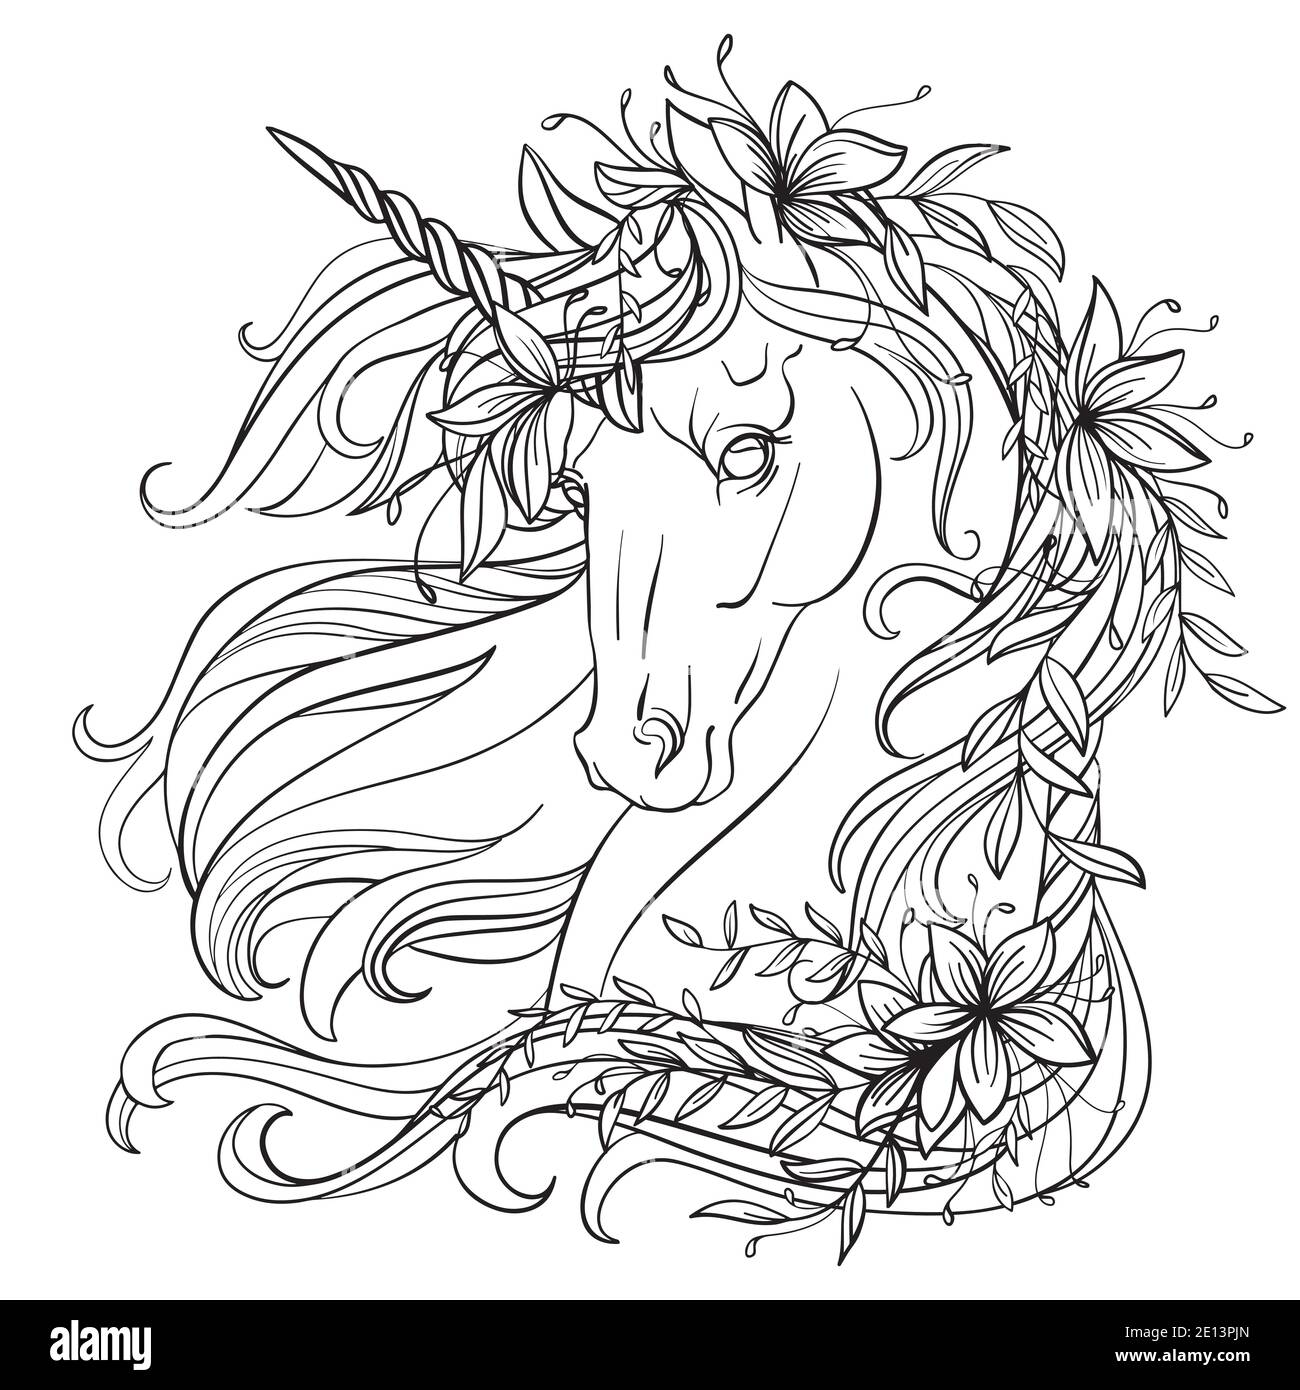 Drawing isolated unicorn with flowers in its long mane. Tangle style for adult coloring book, tattoo, t-shirt design, logo, sign. Stylized illustratio Stock Vector